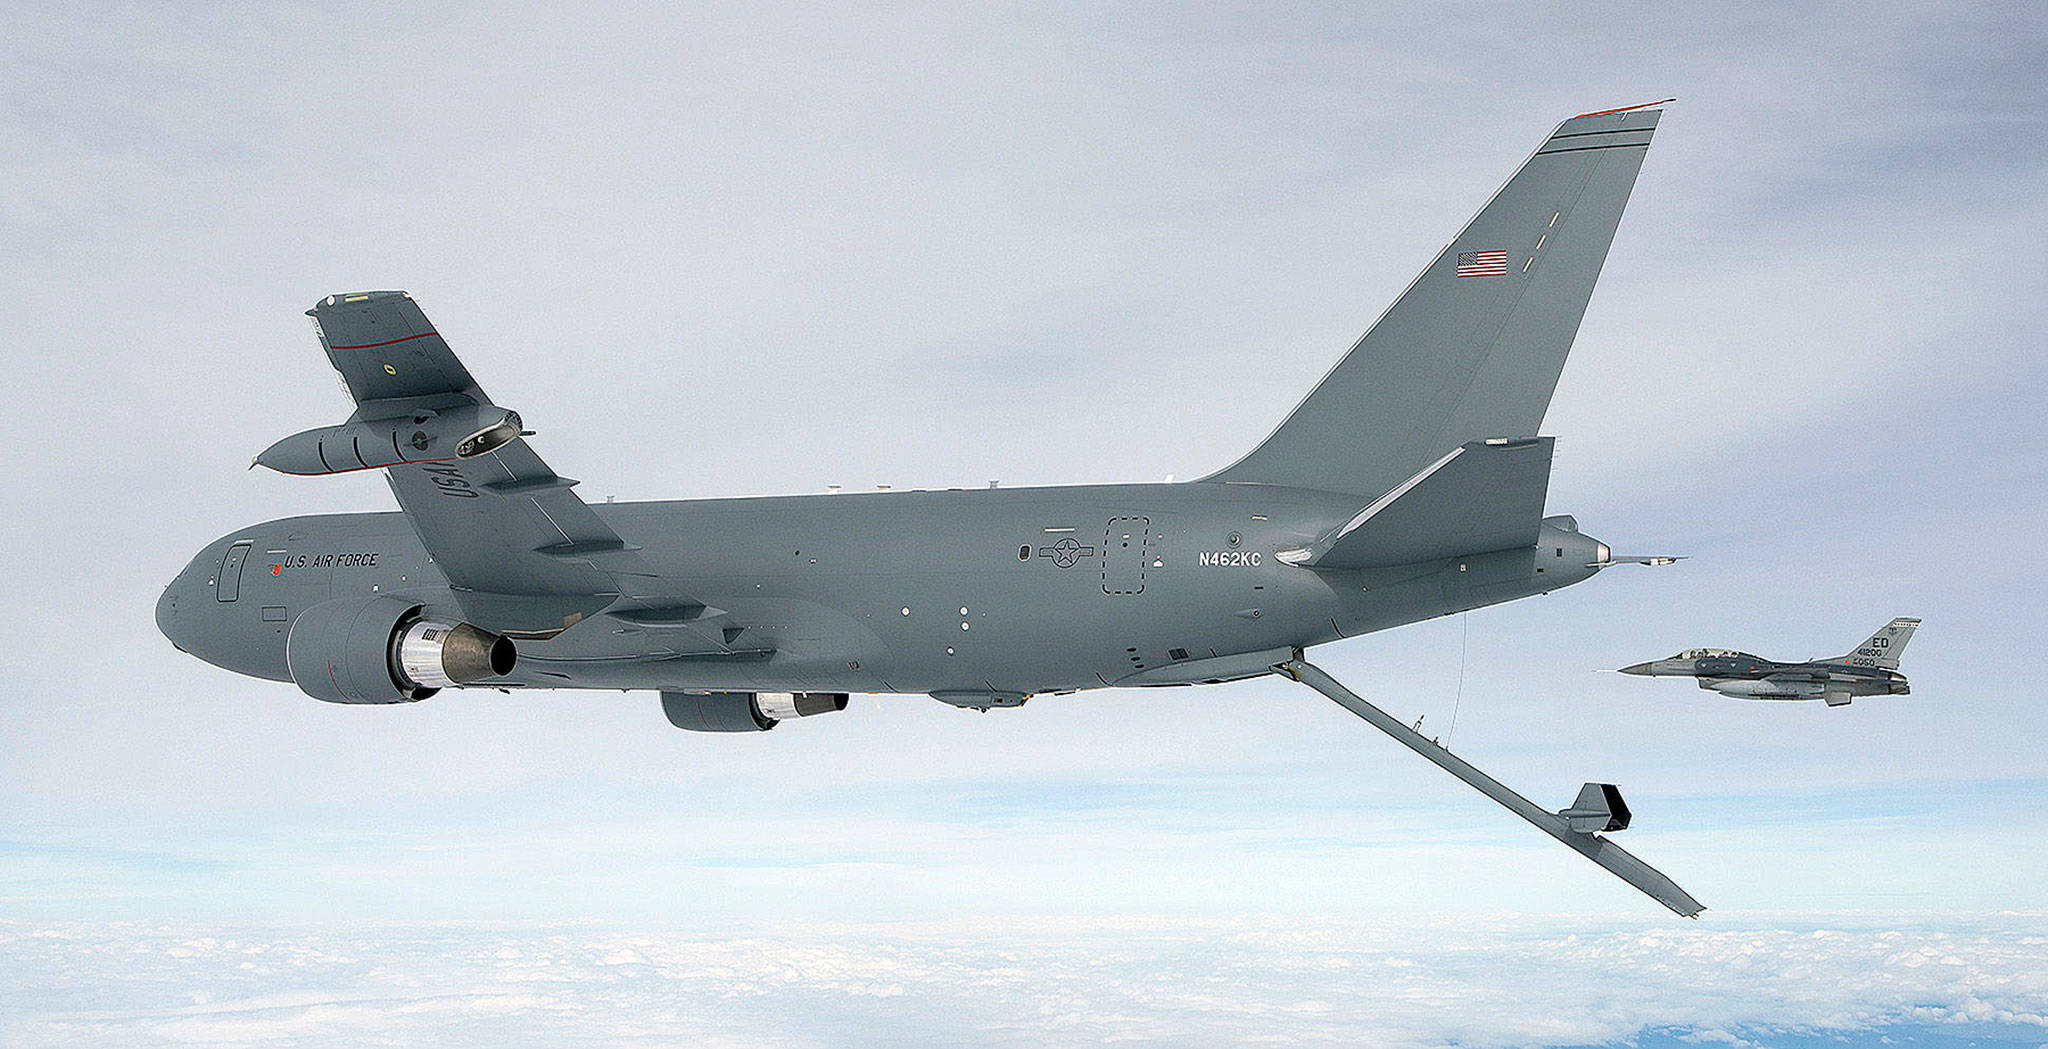 Boeing’s first KC-46 aerial-refueling tanker deploys its boom during a test flight with a U.S. Air Force fighter jet. The tanker is based on Boeing’s 767 and assembled in Everett. (Boeing Co.)